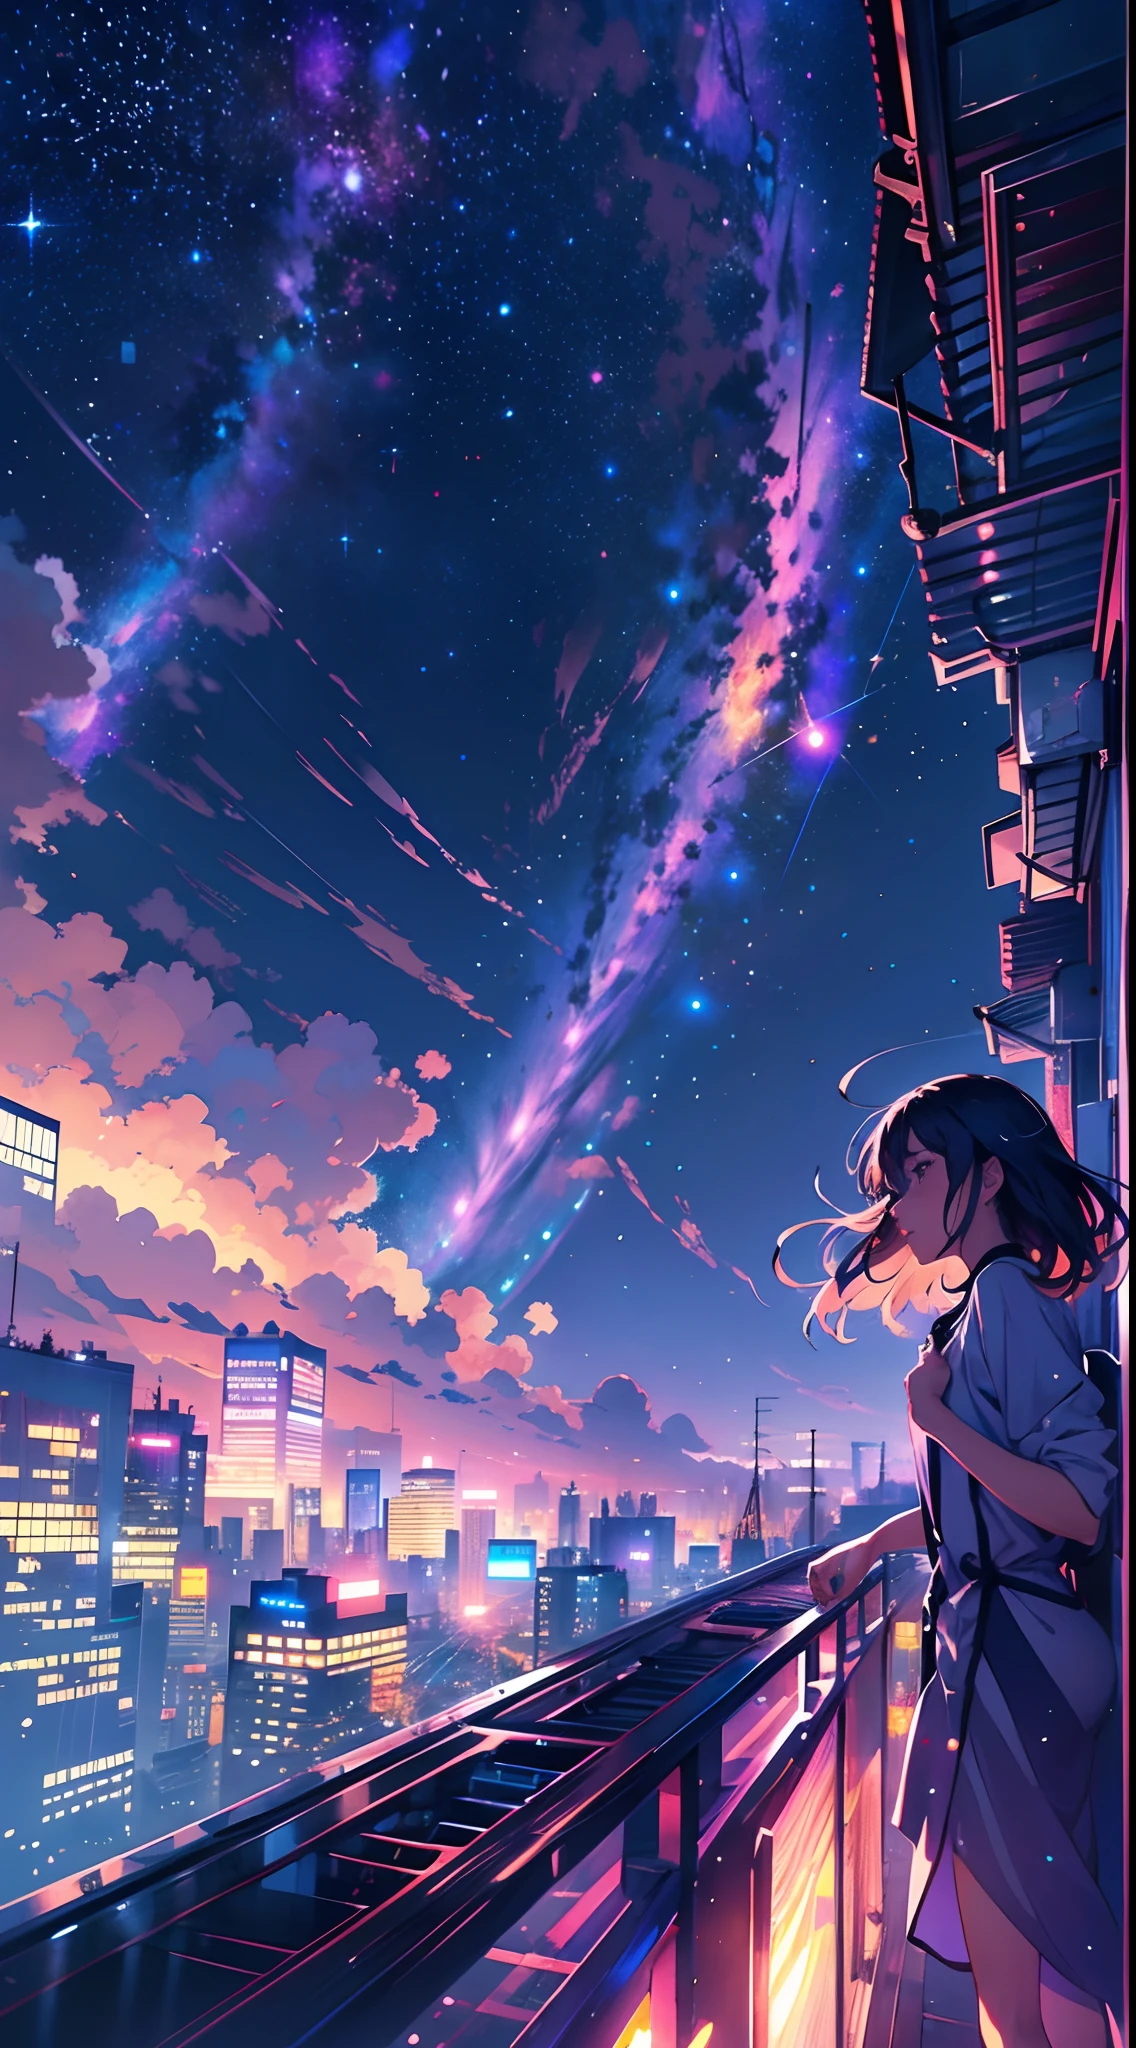 (best quality,4k,highres,masterpiece:1.2),ultra-detailed,realistic,anime girl standing on rooftop staring at night sky with stars and rainbow,rainbow starry night,anime-style art,beautiful detailed eyes,beautiful detailed lips,extremely detailed eyes and face,long eyelashes,vibrant colors,portraits,landscape,cityscape,huge full moon,quiet and calm atmosphere,majestic skyline with towering buildings,peaceful and serene feeling,detailed architecture silhouette,motionless and still air,soft gentle breeze,wispy clouds and fog,luminous starry sky,sparkling and shimmering stars,breathtaking star-filled backdrop,gorgeous vibrant rainbow,softly glowing rainbow colors,shooting stars streaking across the sky,crisp and clear view of night sky,gorgeous anime art wallpaper,ethereal and dreamlike setting,makoto shinkai cyril rolando-inspired illustration,immersive and captivating scene,mesmerizing anime girl with flowing hair,calm and content expression,city lights twinkling below,nighttime cityscape with glowing windows,tranquil and awe-inspiring rooftop view,peaceful and mesmerizing ambiance,reflective and contemplative moment,deep sense of tranquility and solitude,light pollution revealing distant galaxies and constellations,awe-inspiring beauty of the universe,heartwarming sense of wonder and awe.